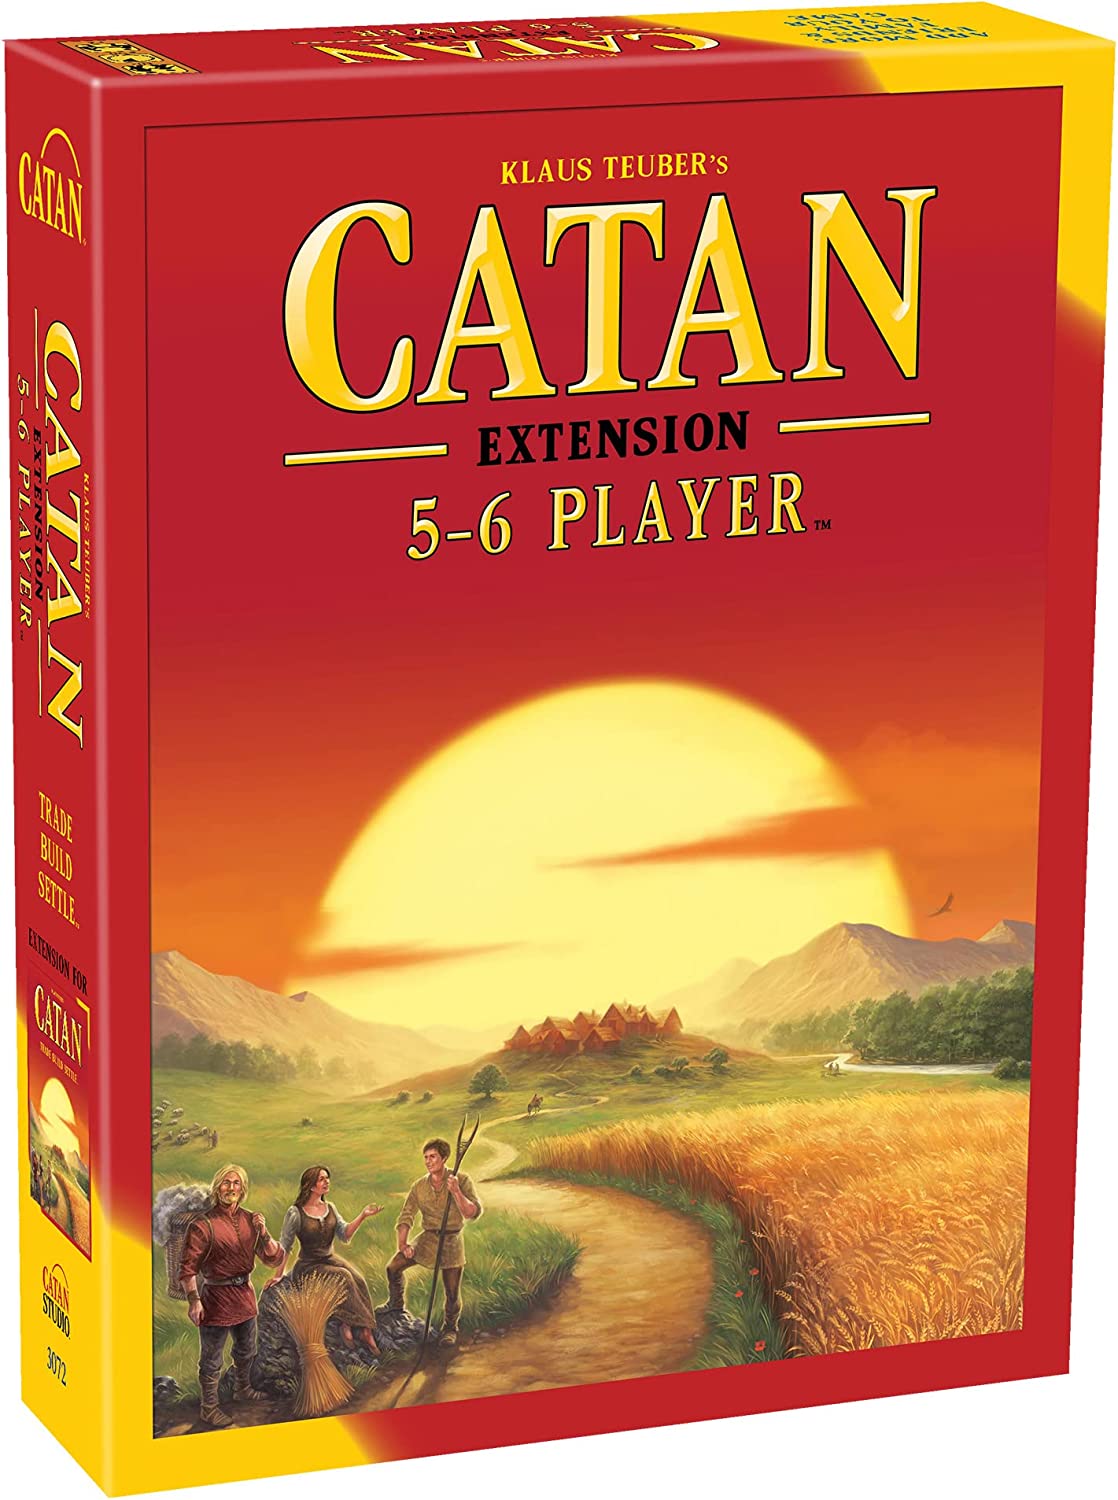 Catan 5-6 Player Extension (5th Edition)